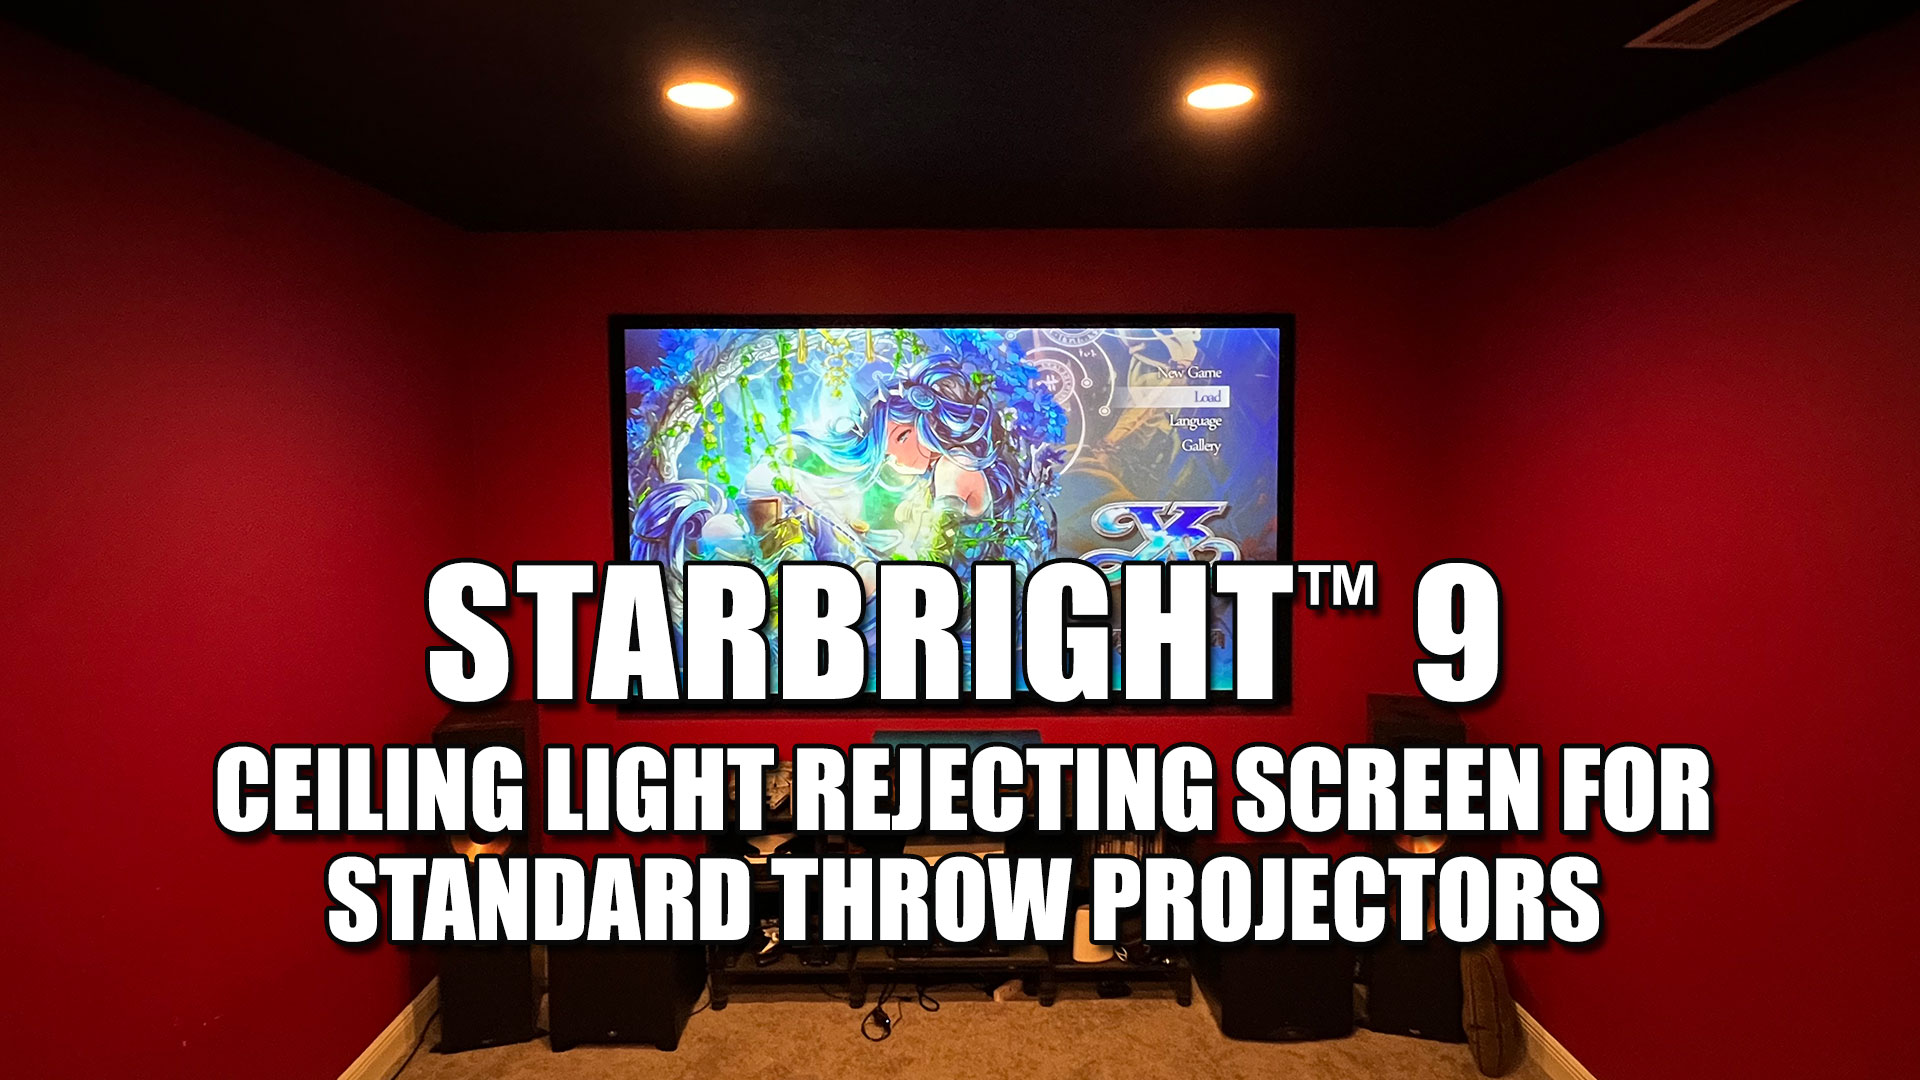 Elite Screens StarBright 9 Ceiling Light Rejecting Screen for Standard Throw Projectors